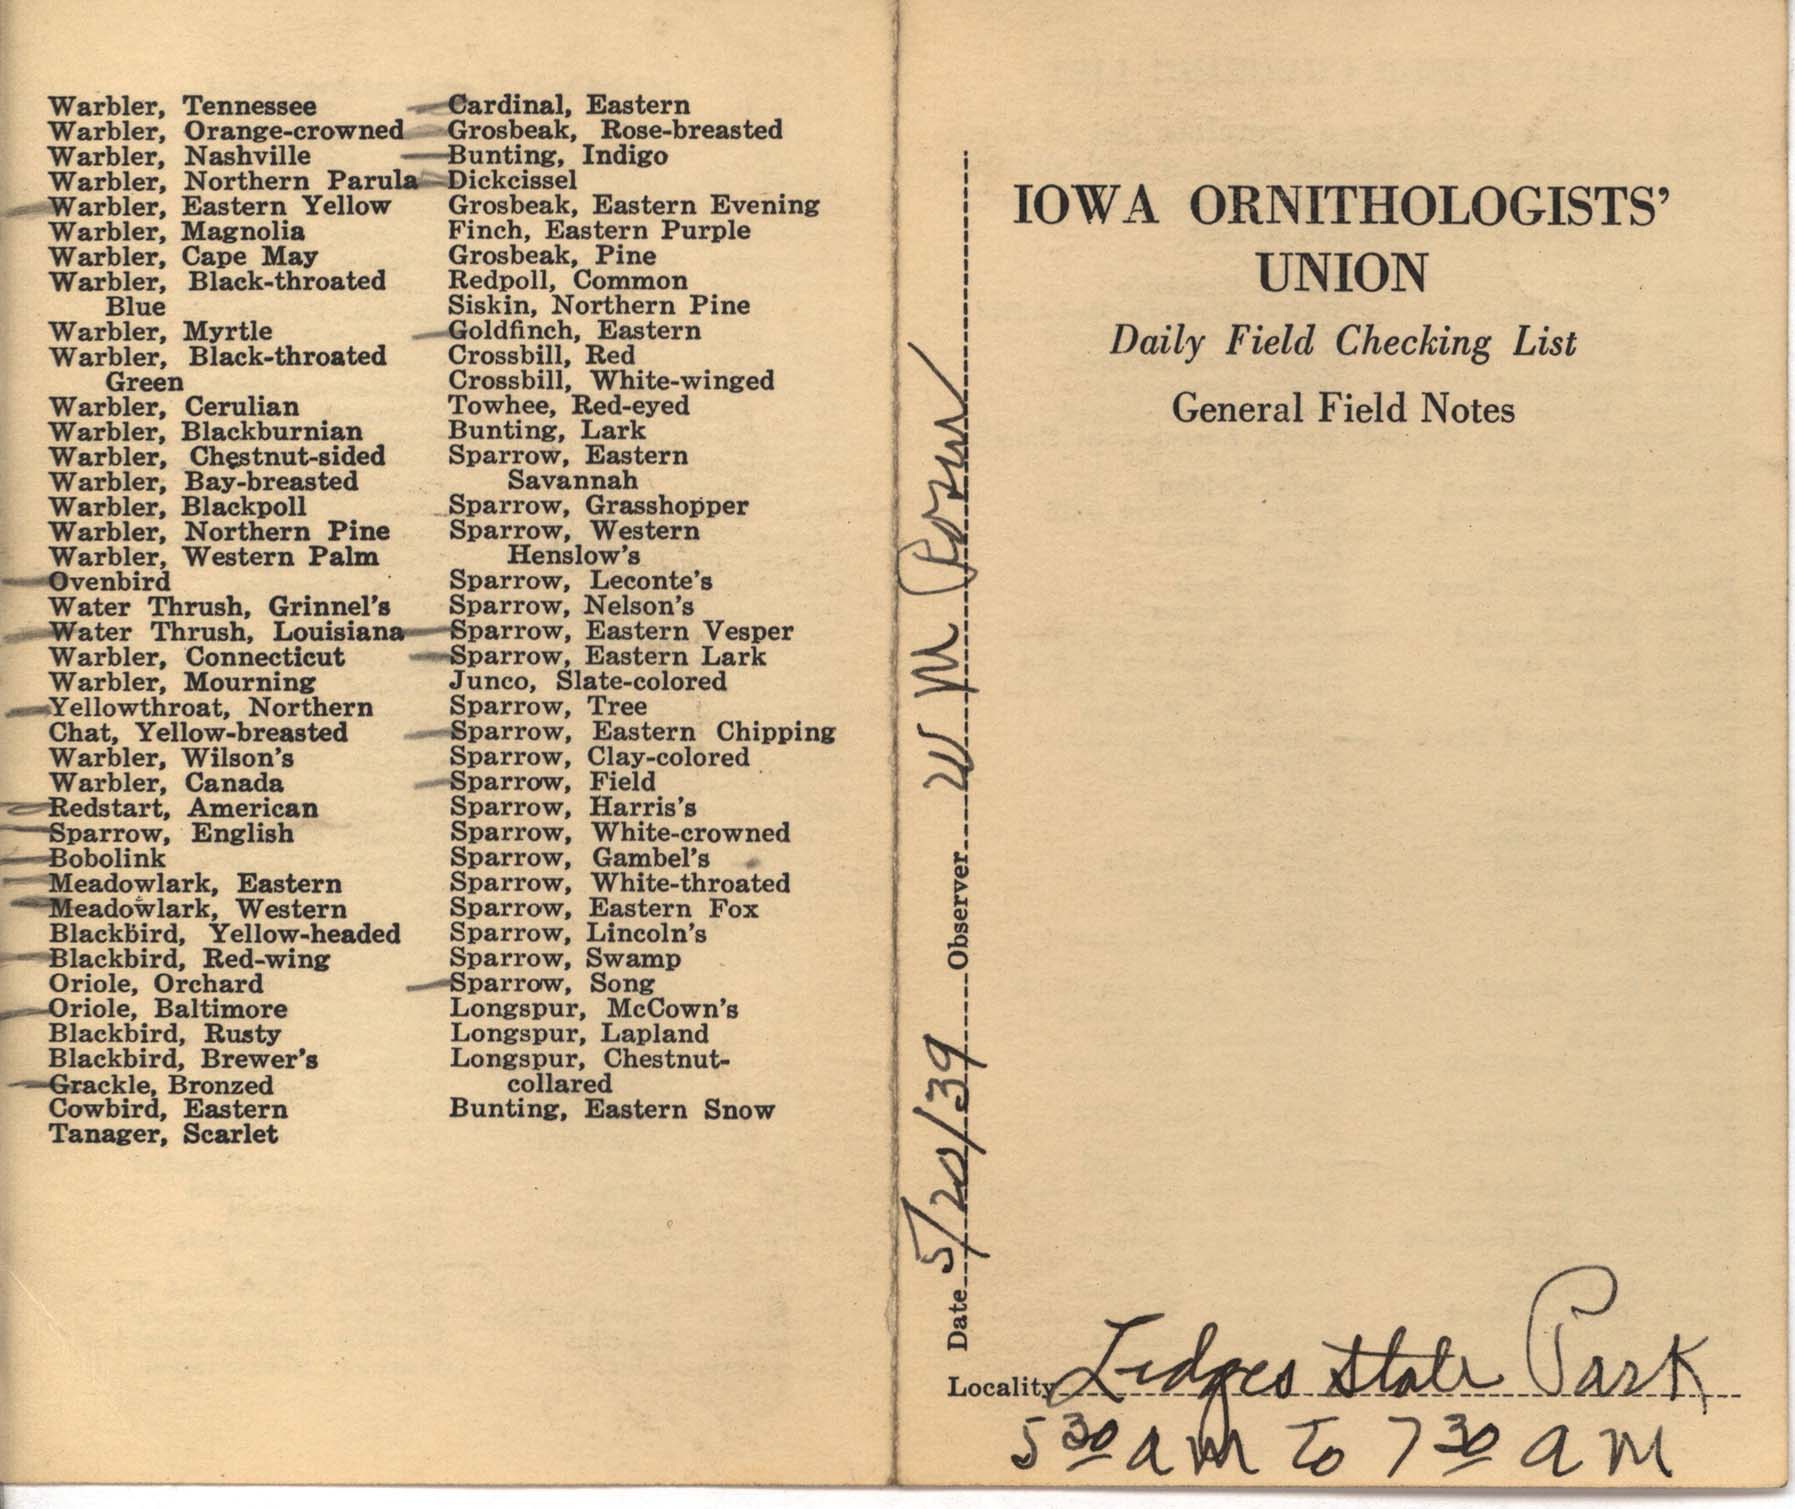 Daily field checking list by Walter Rosene, May 20, 1939